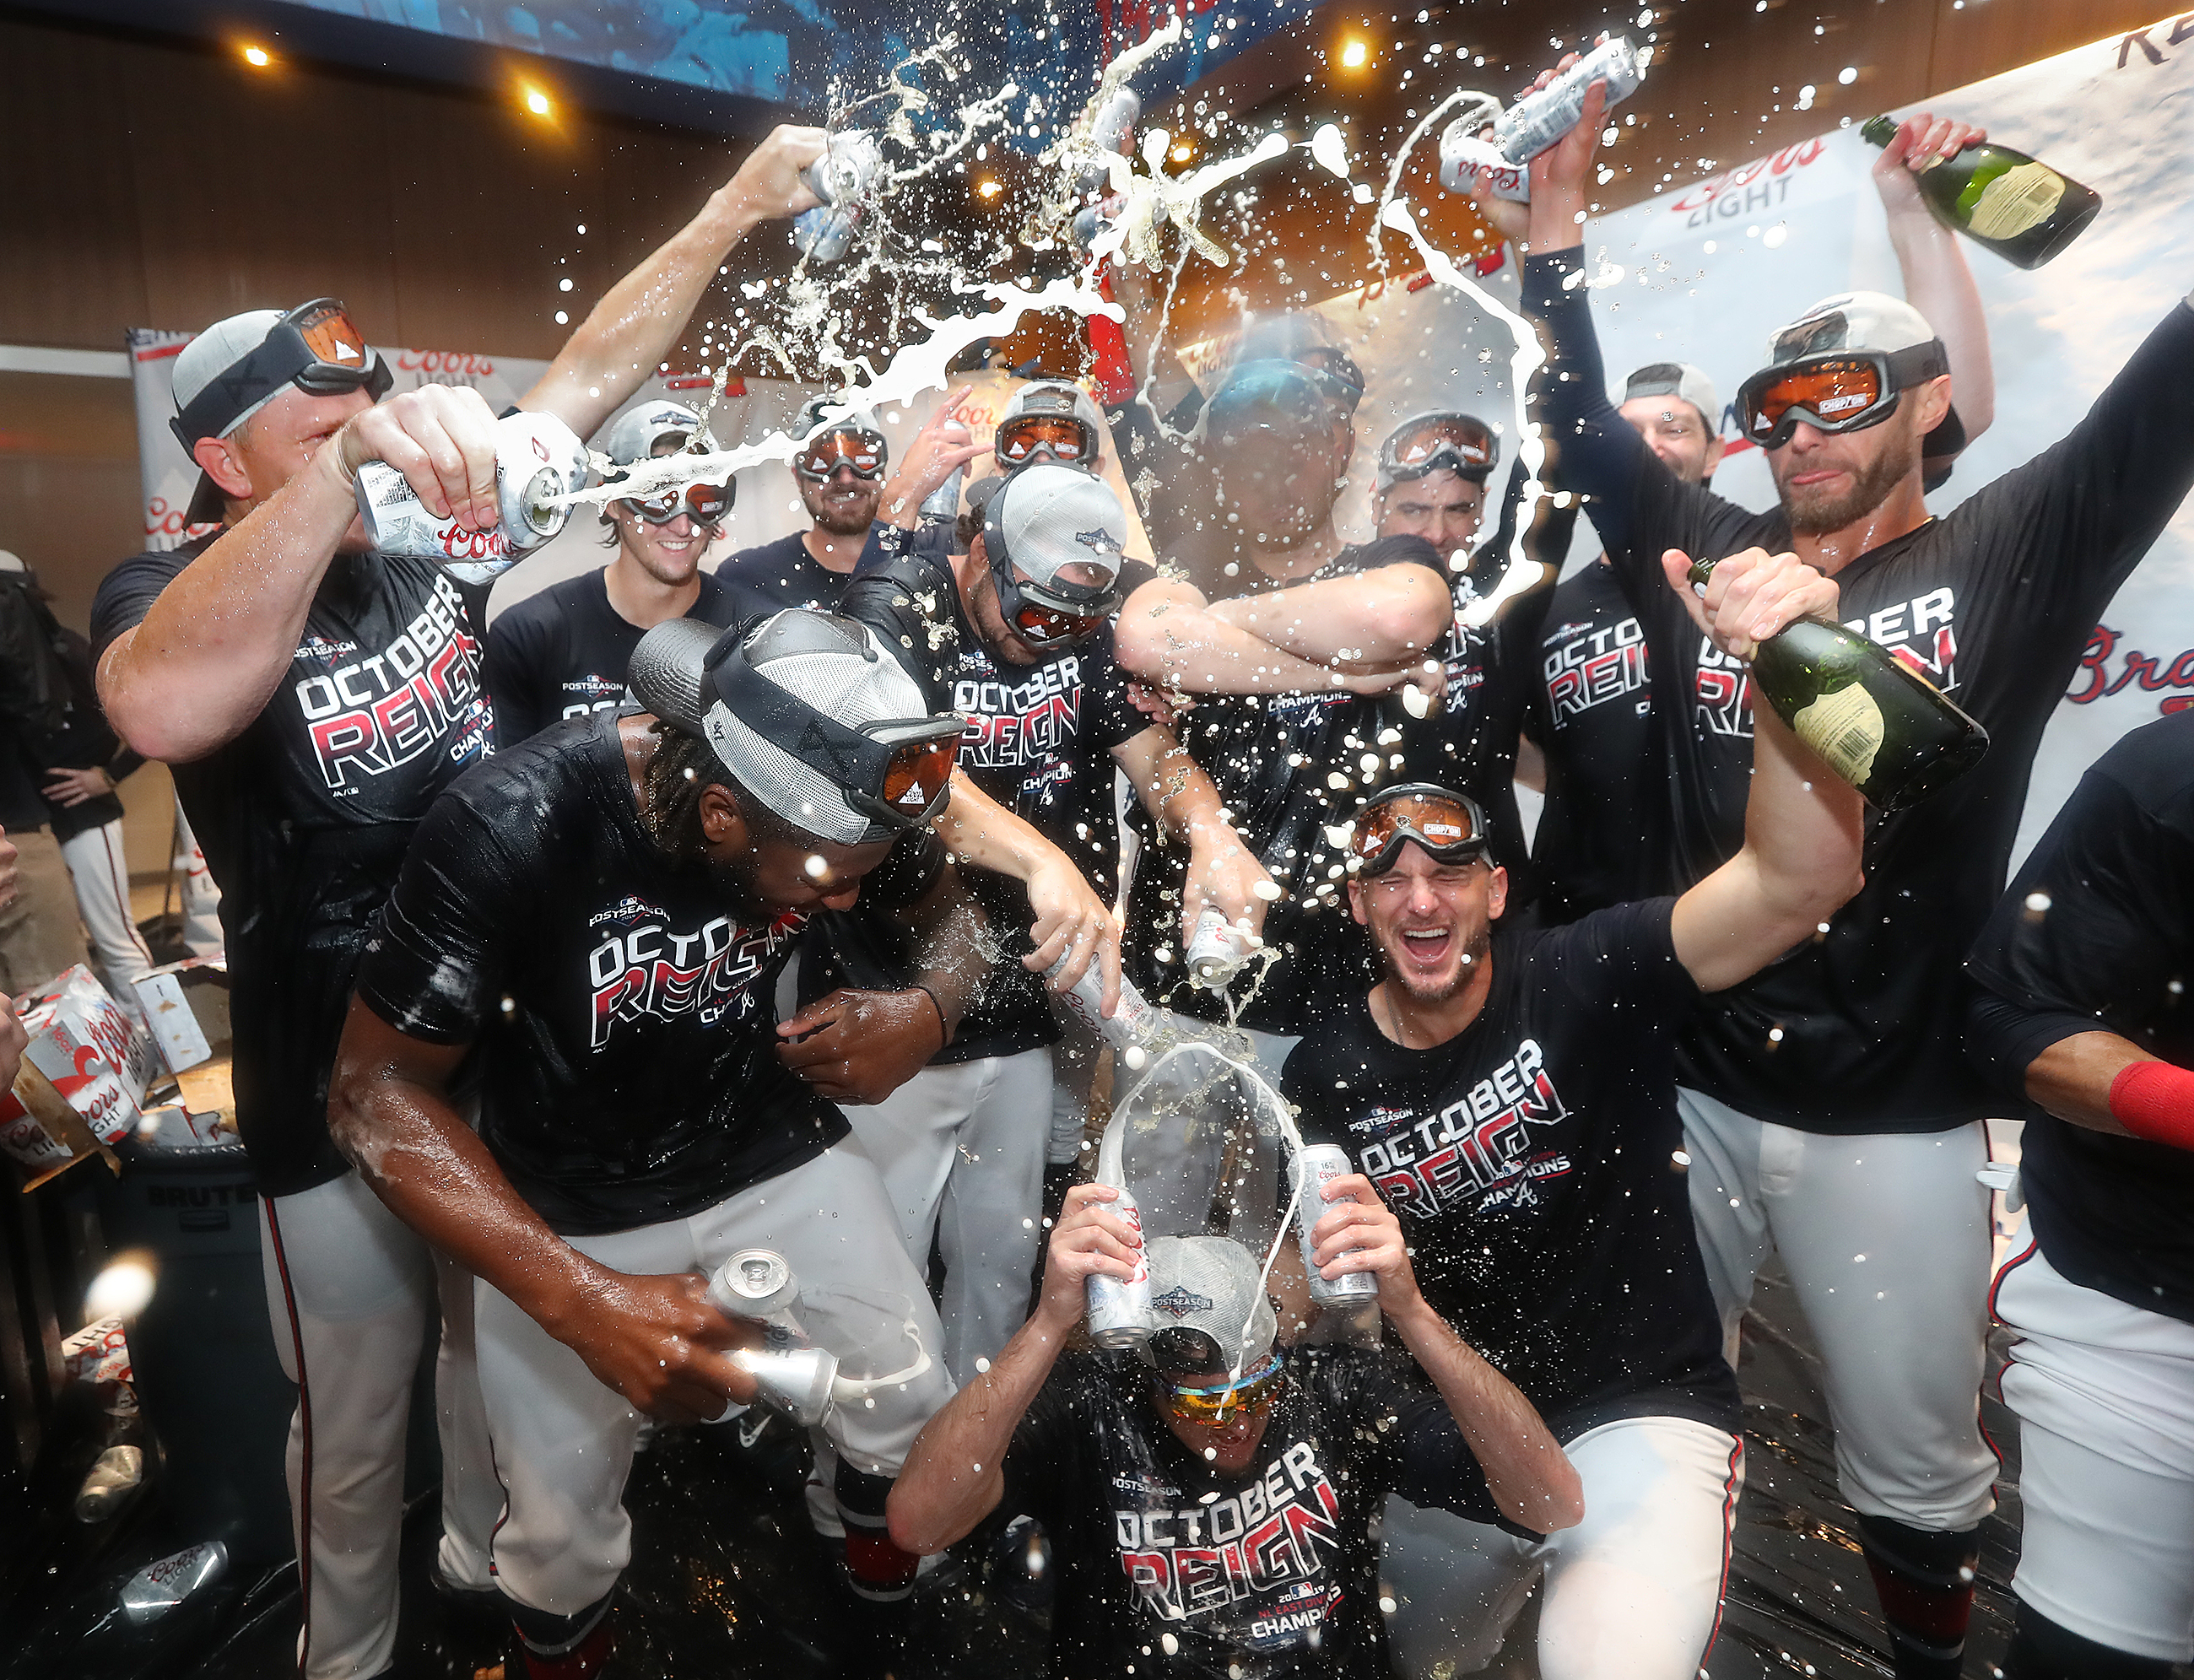 Braves clinch NL East with 6-0 win over Giants